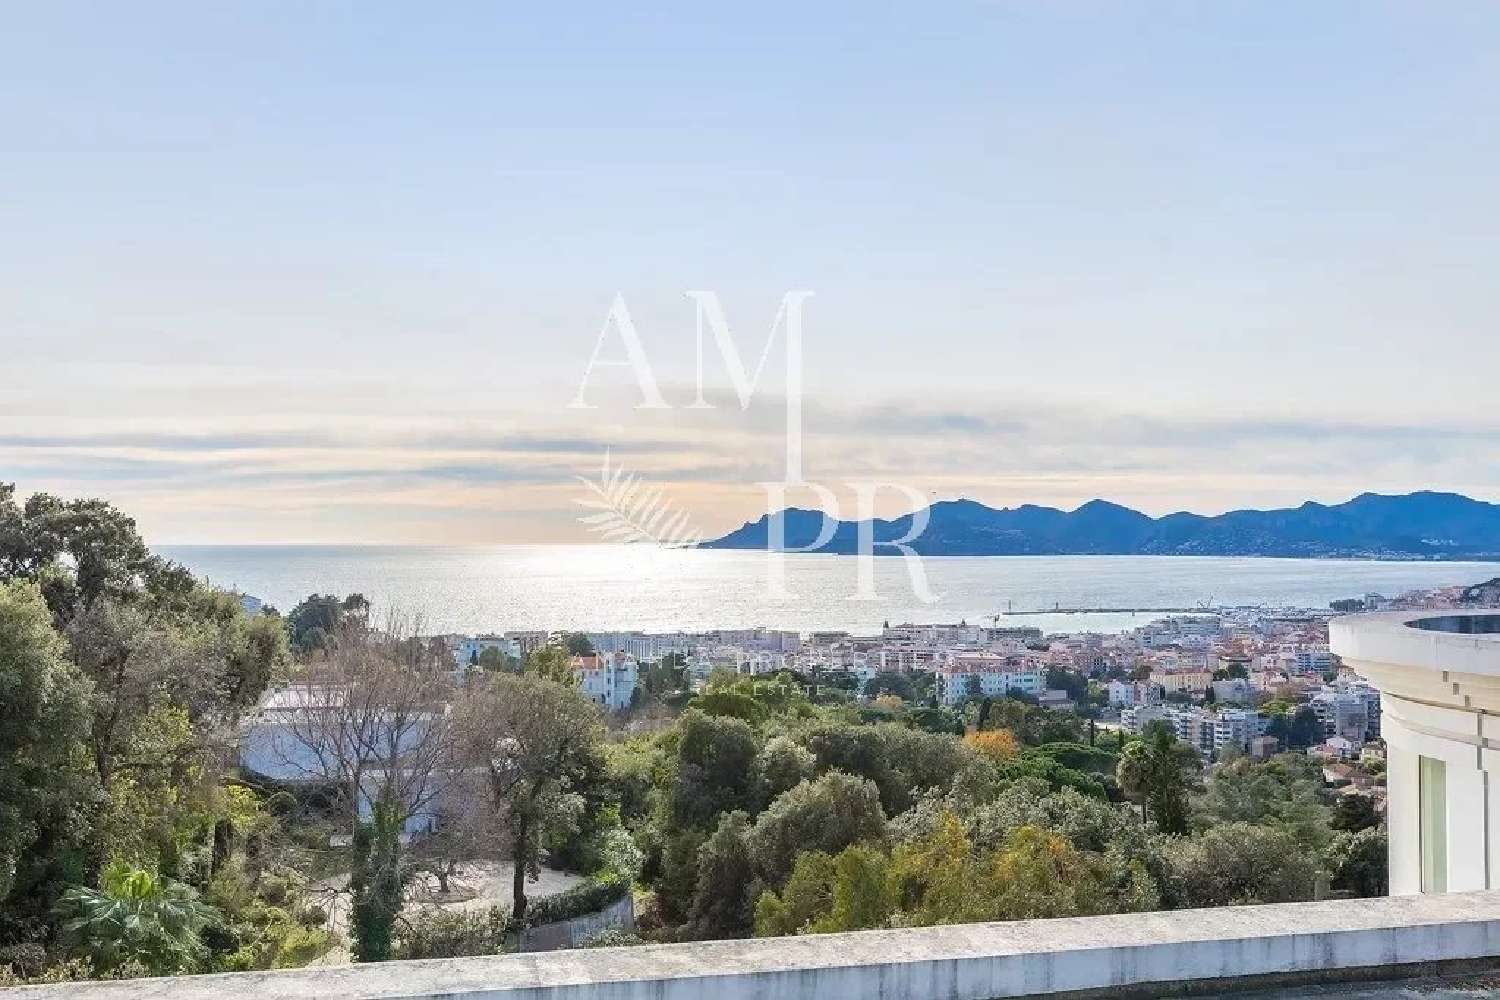  for sale house Cannes Alpes-Maritimes 2